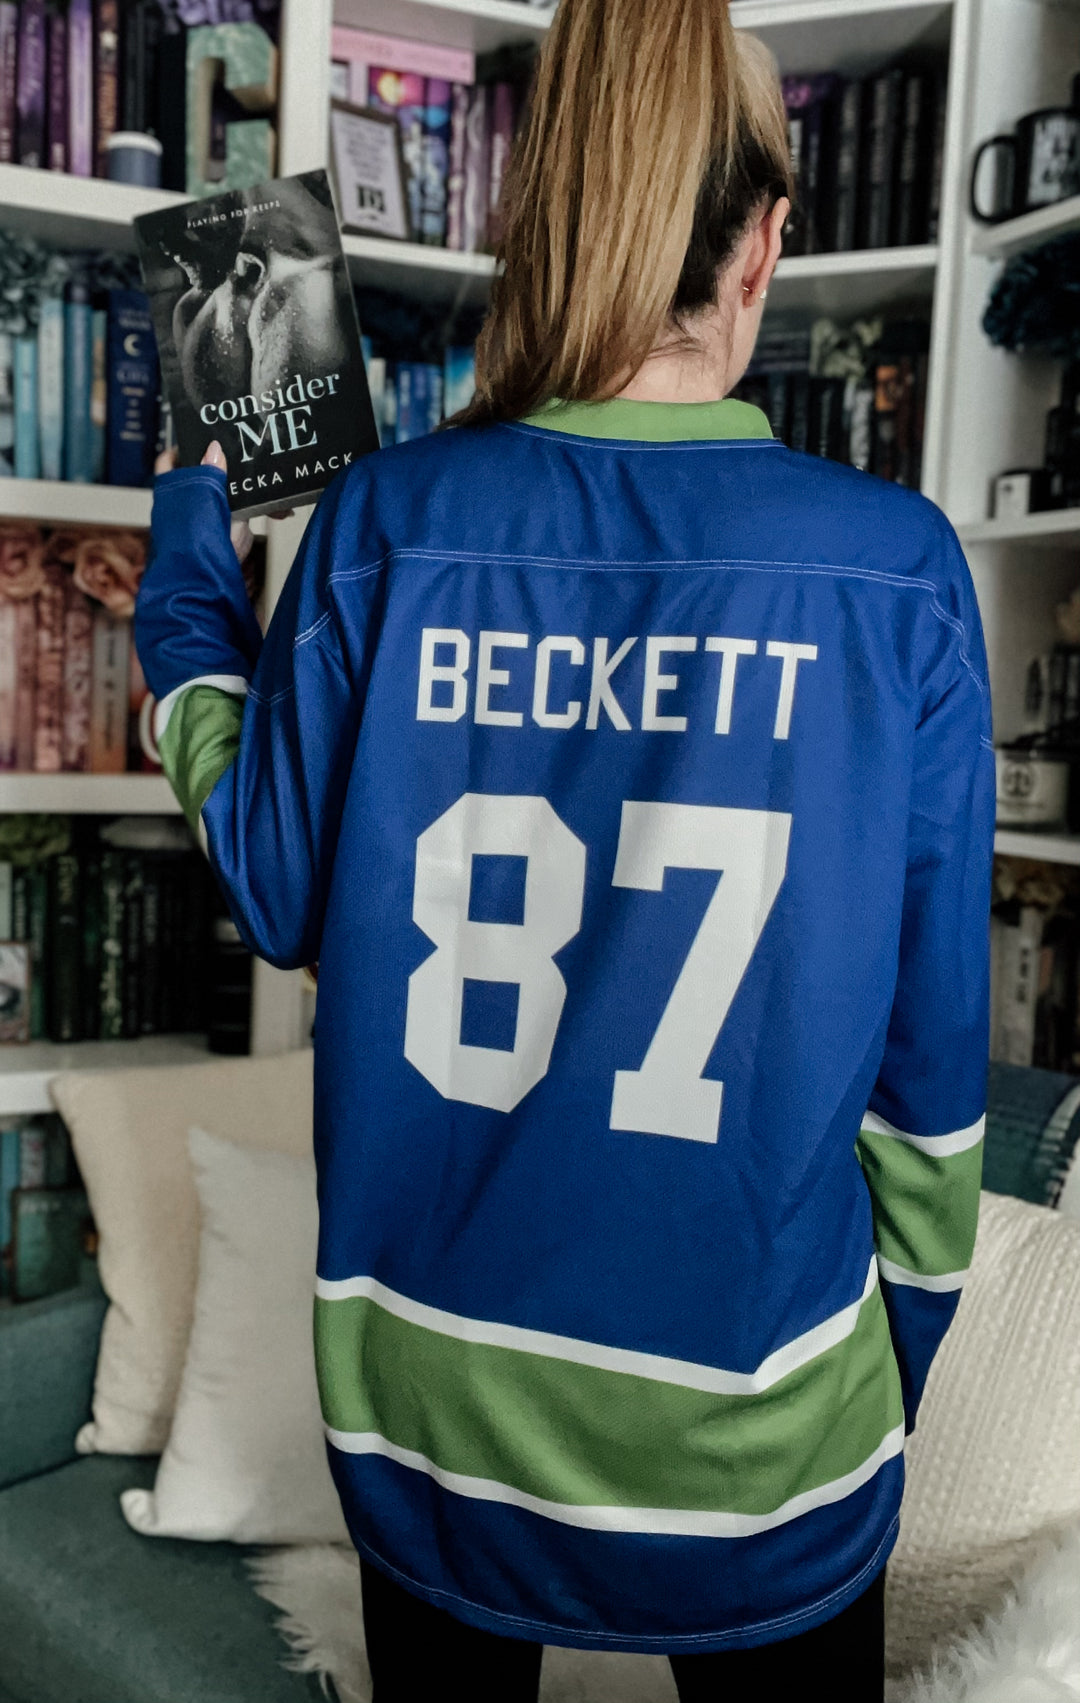 a woman in a hockey jersey reading a book